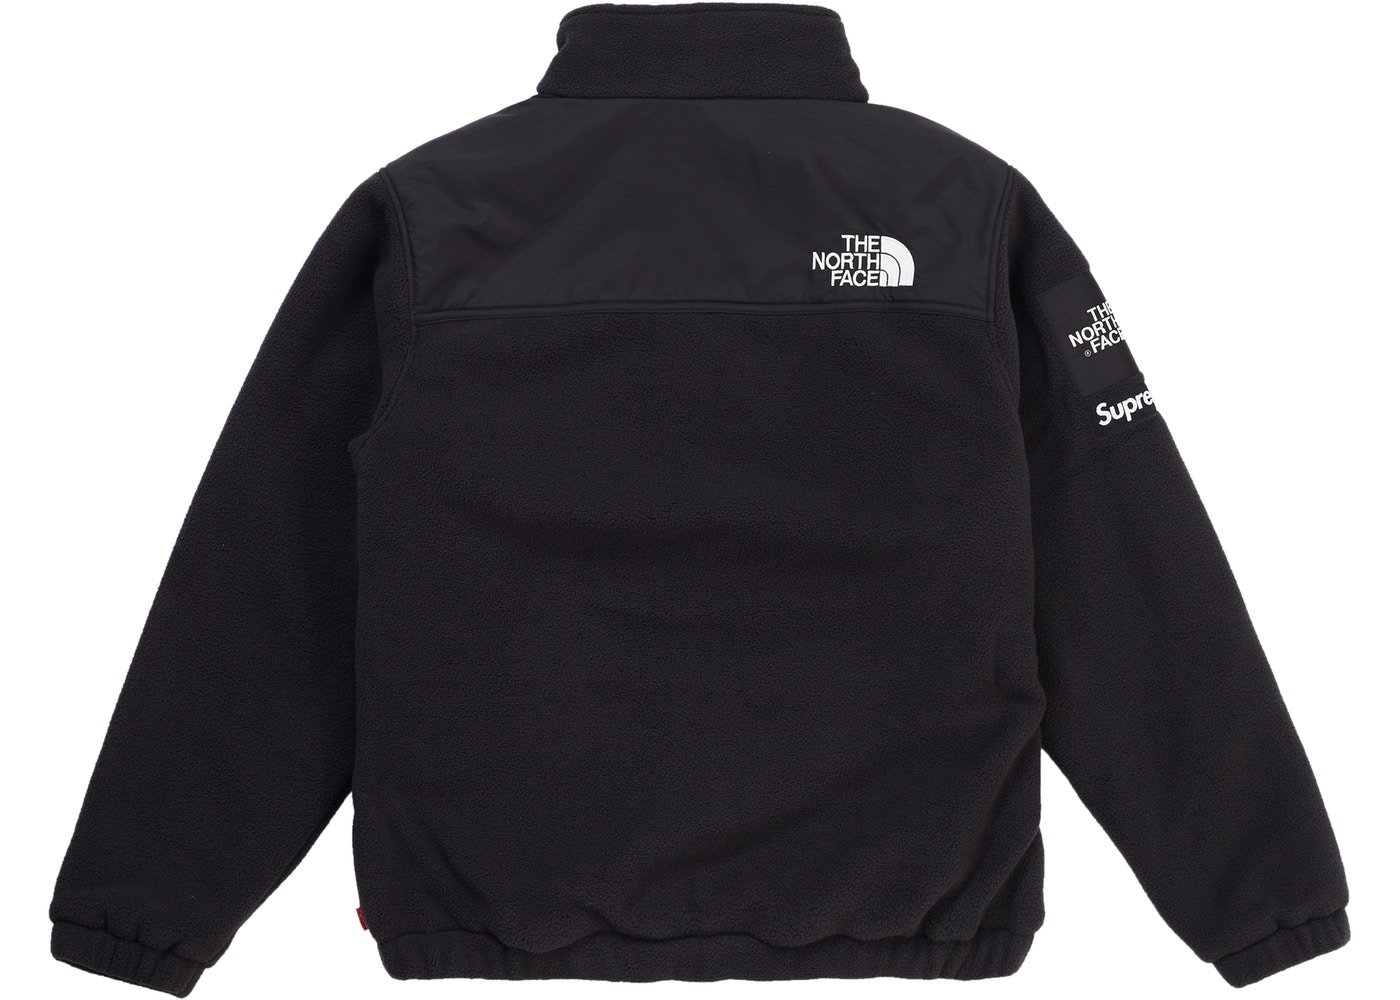 2018 Supreme The North Face Expedition Fleece Jacket 羊毛保暖黑